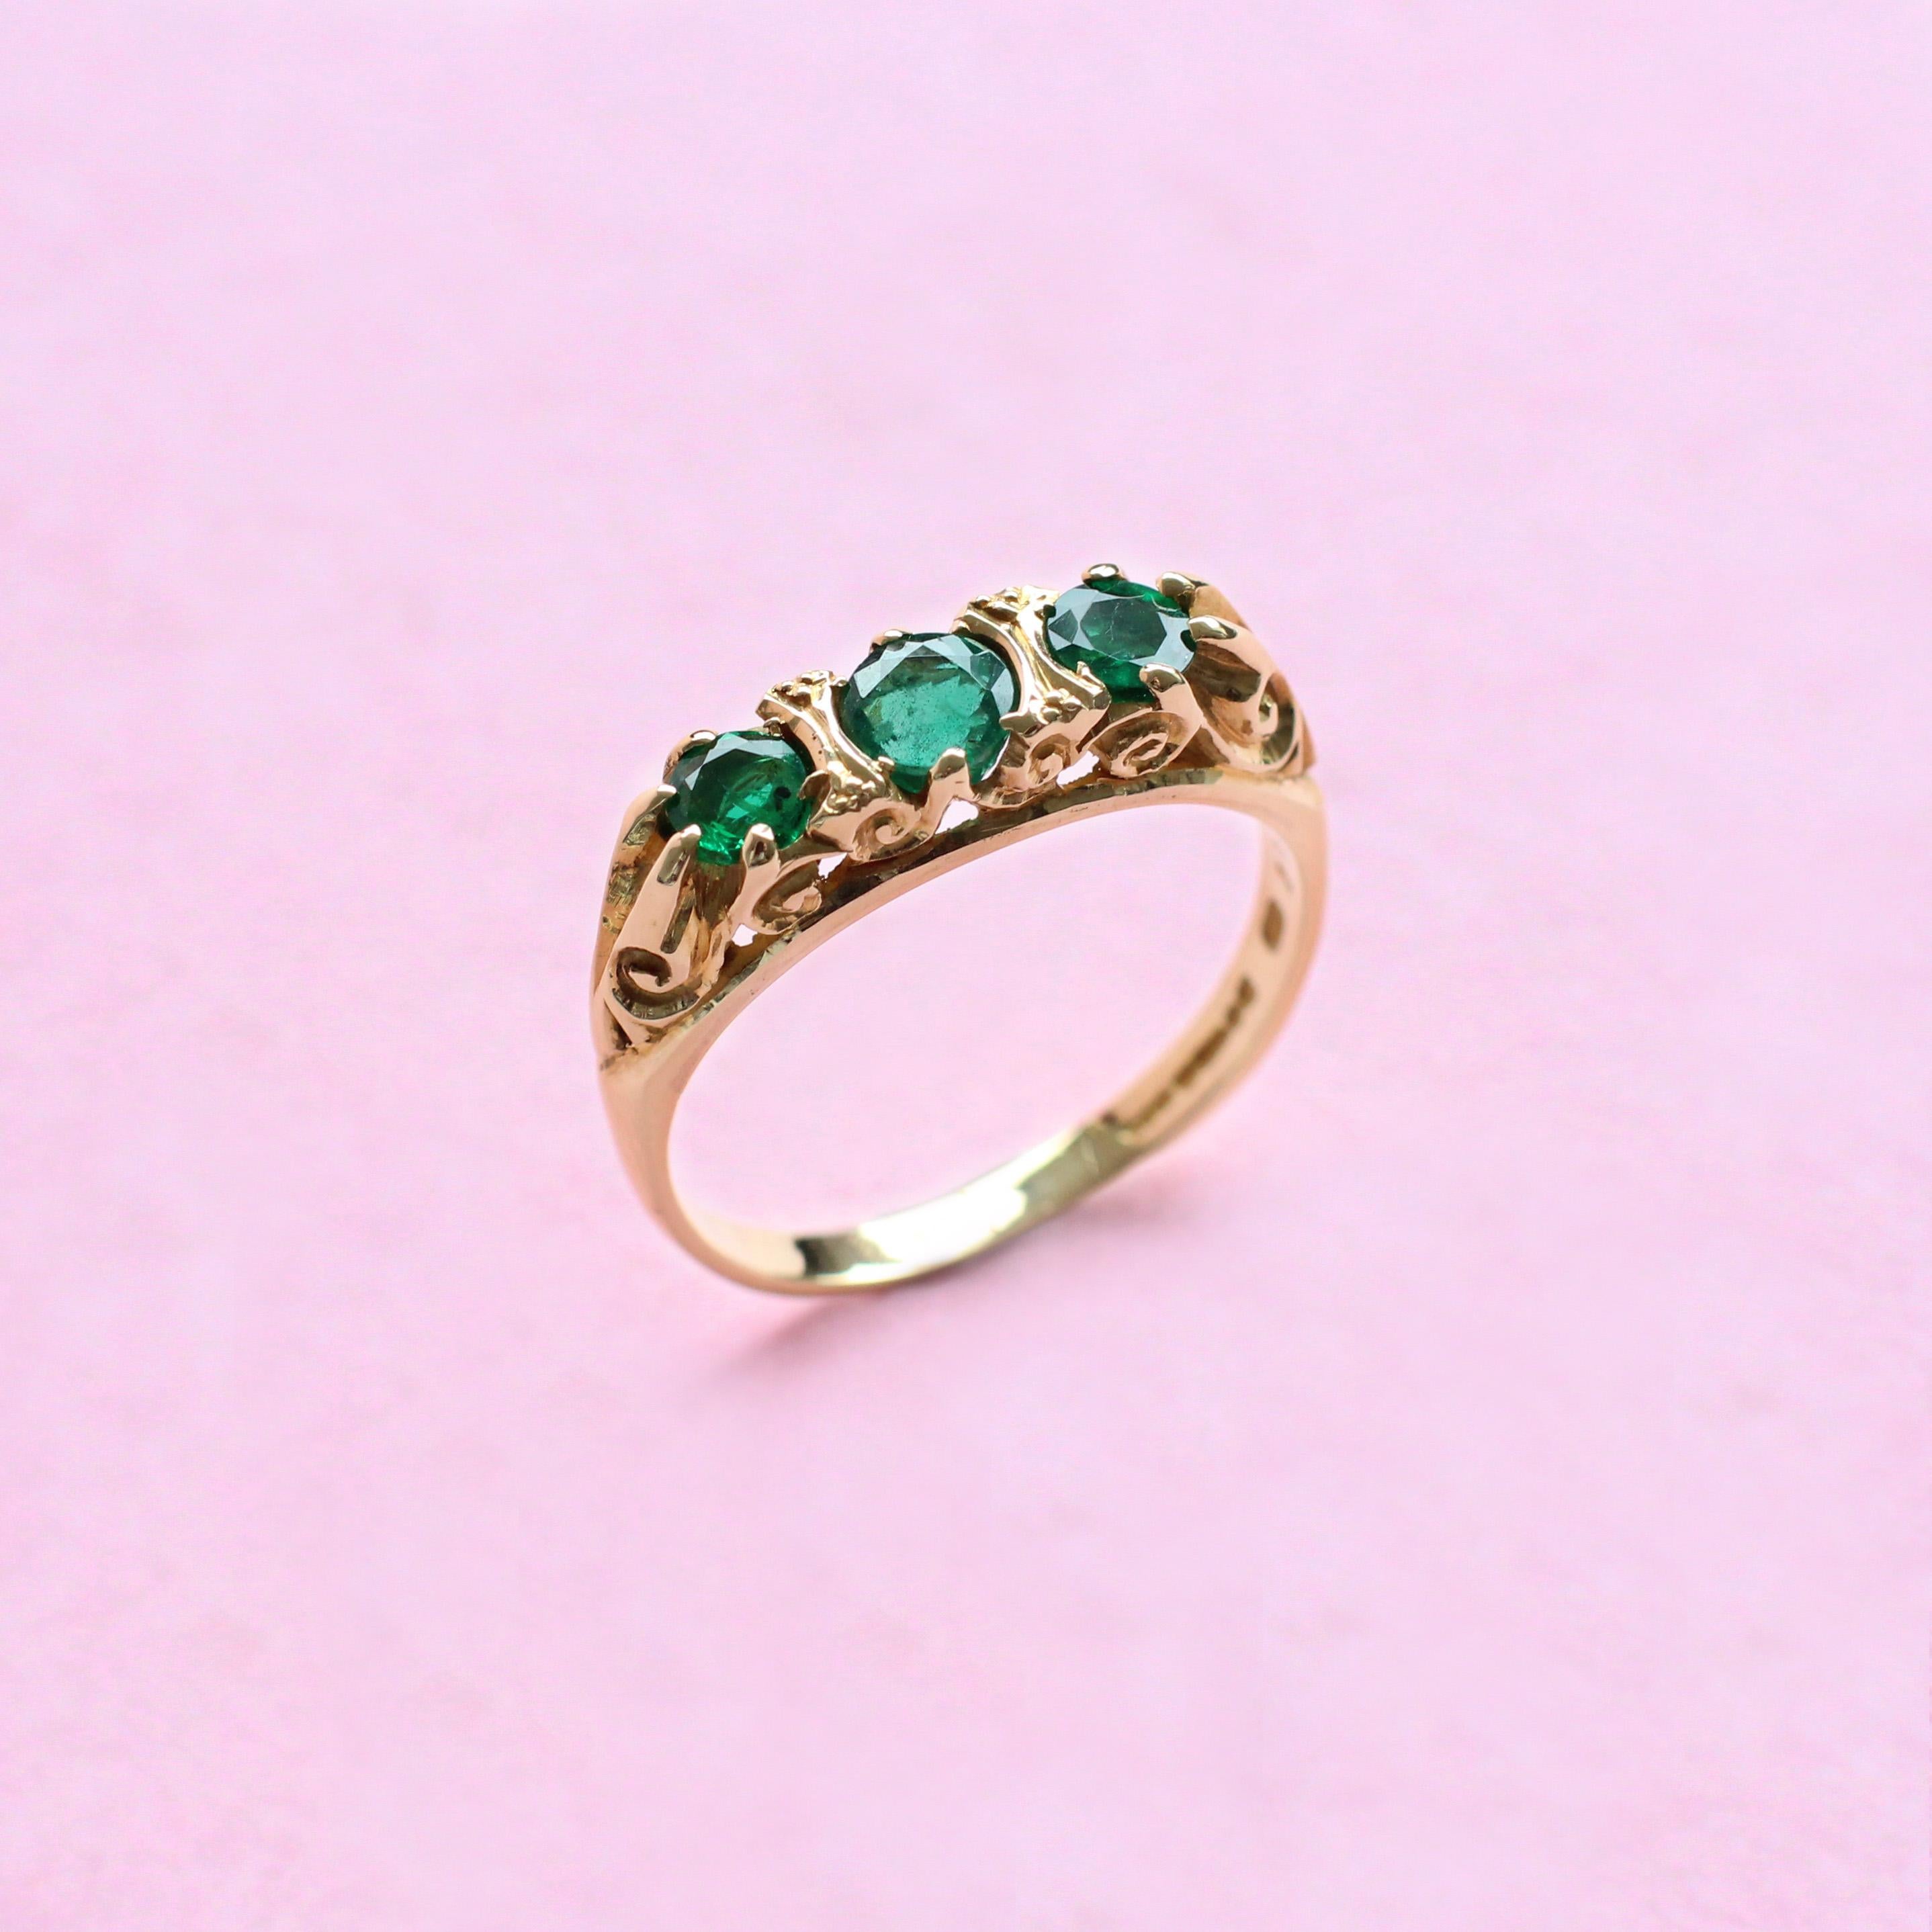 The beauty of this three-stone piece lies in its simplicity. A trio of round cut emeralds in deep, dramatic green are set in a beautiful yellow gold band, whose intricate detail gives it a vintage feel. A unique ring designed in our London atelier